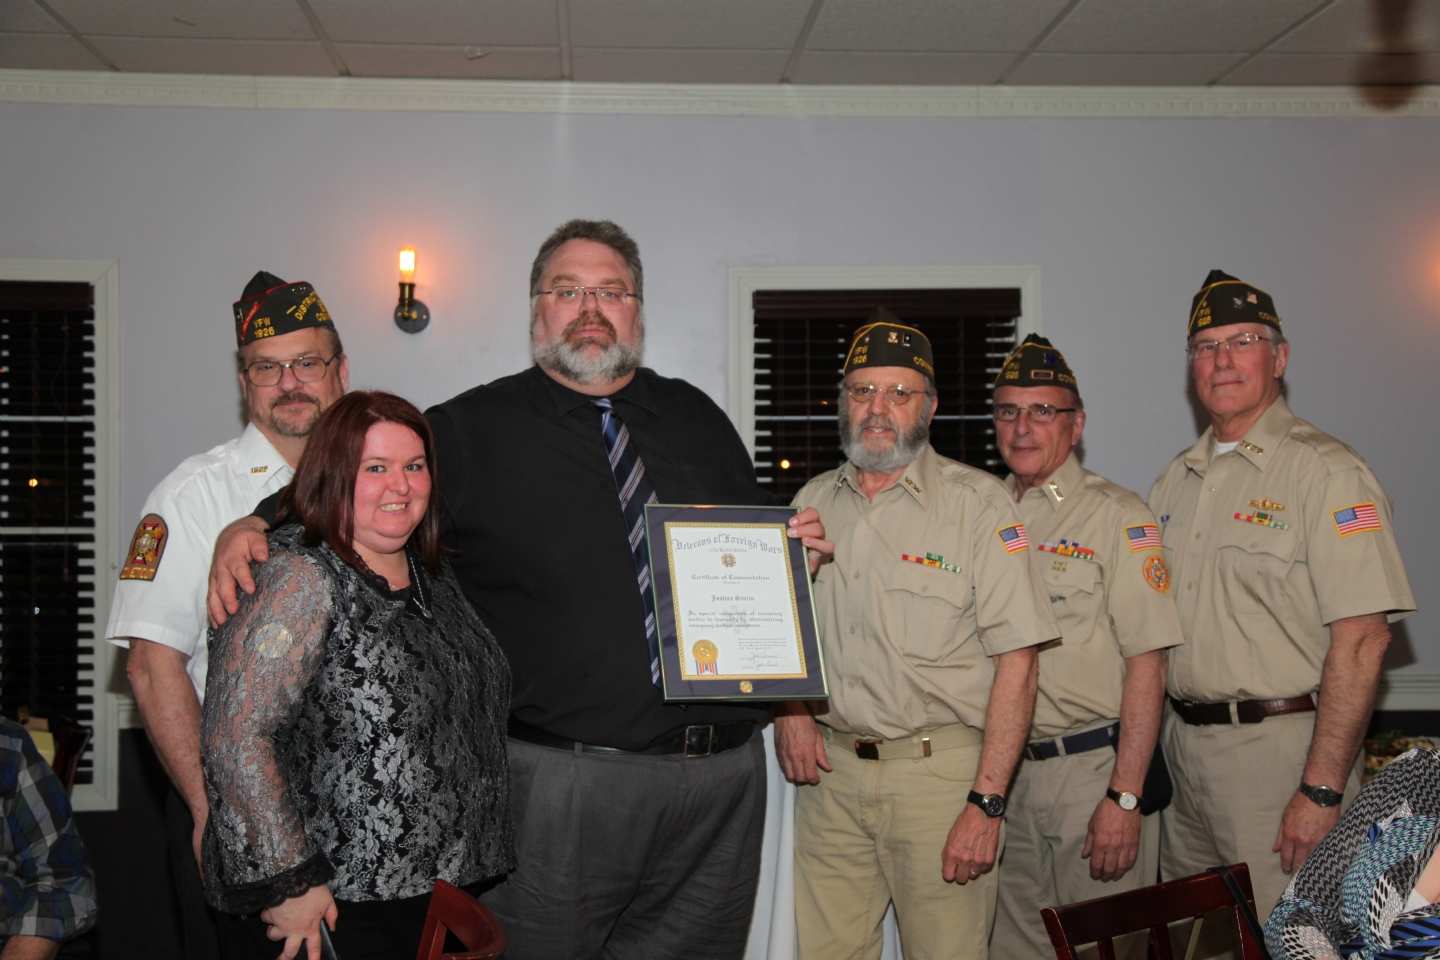 The Metacomet Post 1926, Veterans of Foreign Wars, Simsbury, CT
presents special certificate to Joshua Storm, Simsbury Volunteer Ambulance Association